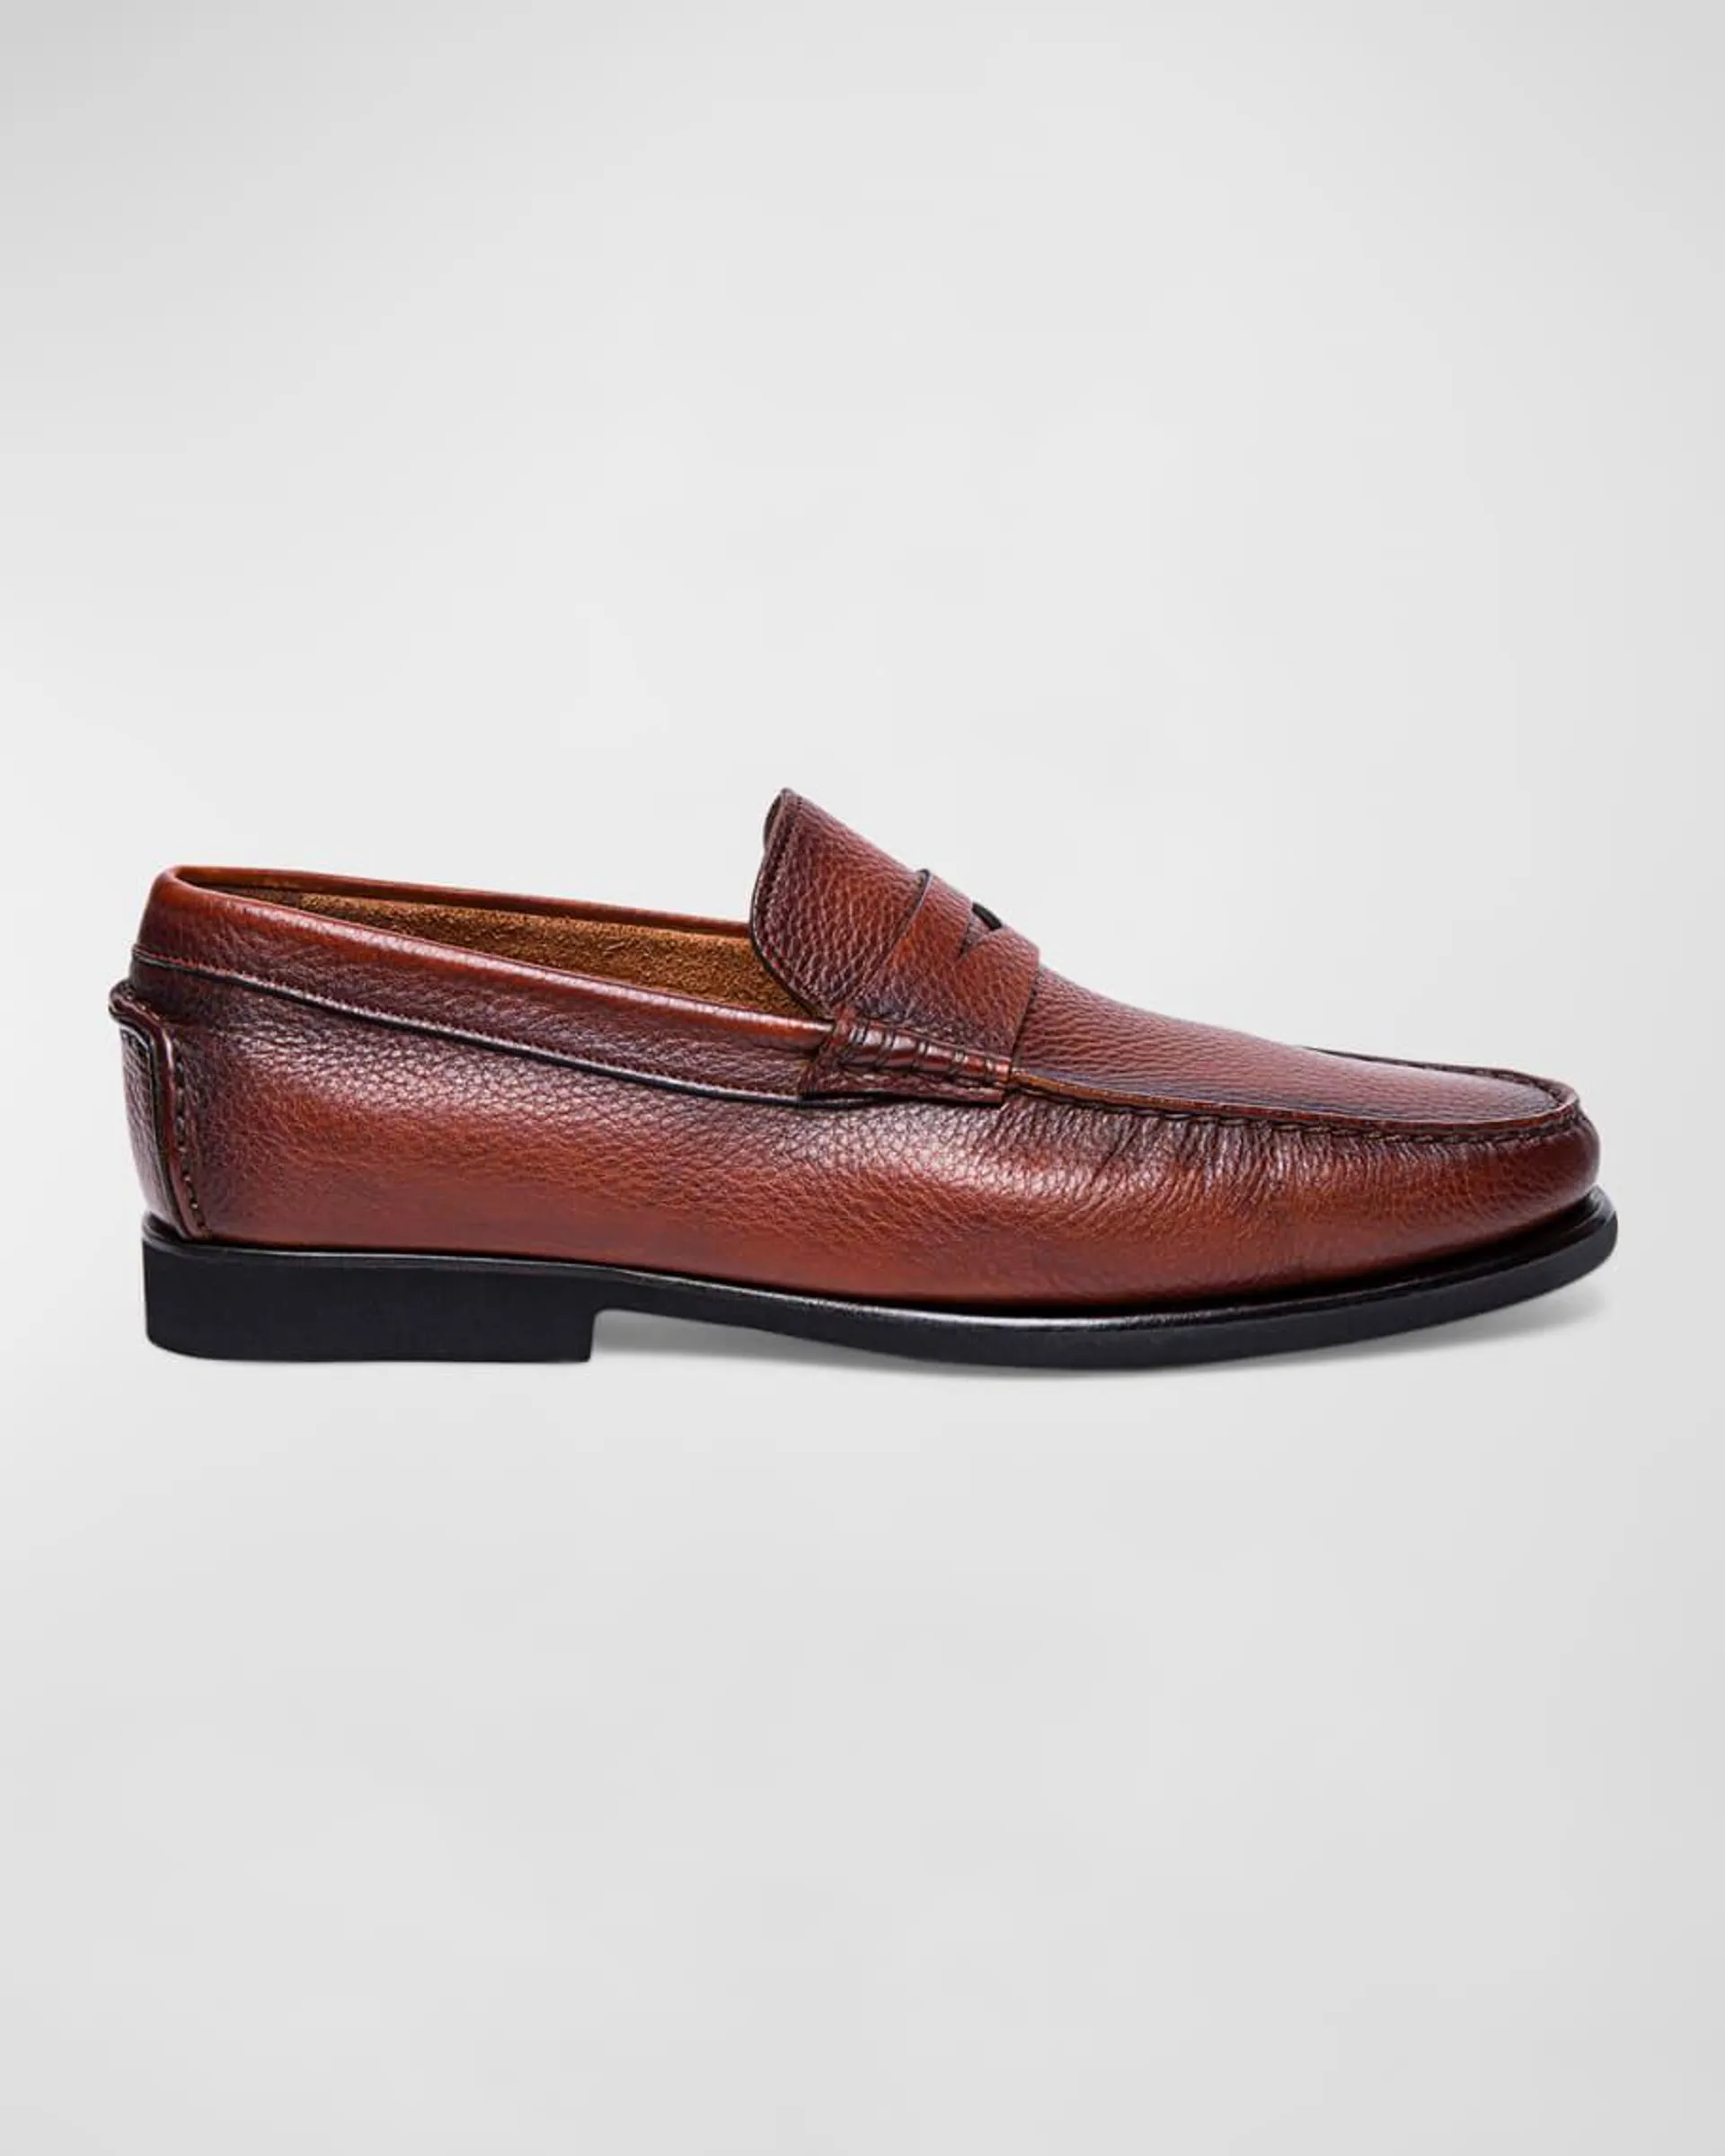 Men's Ikangia Leather Penny Loafers